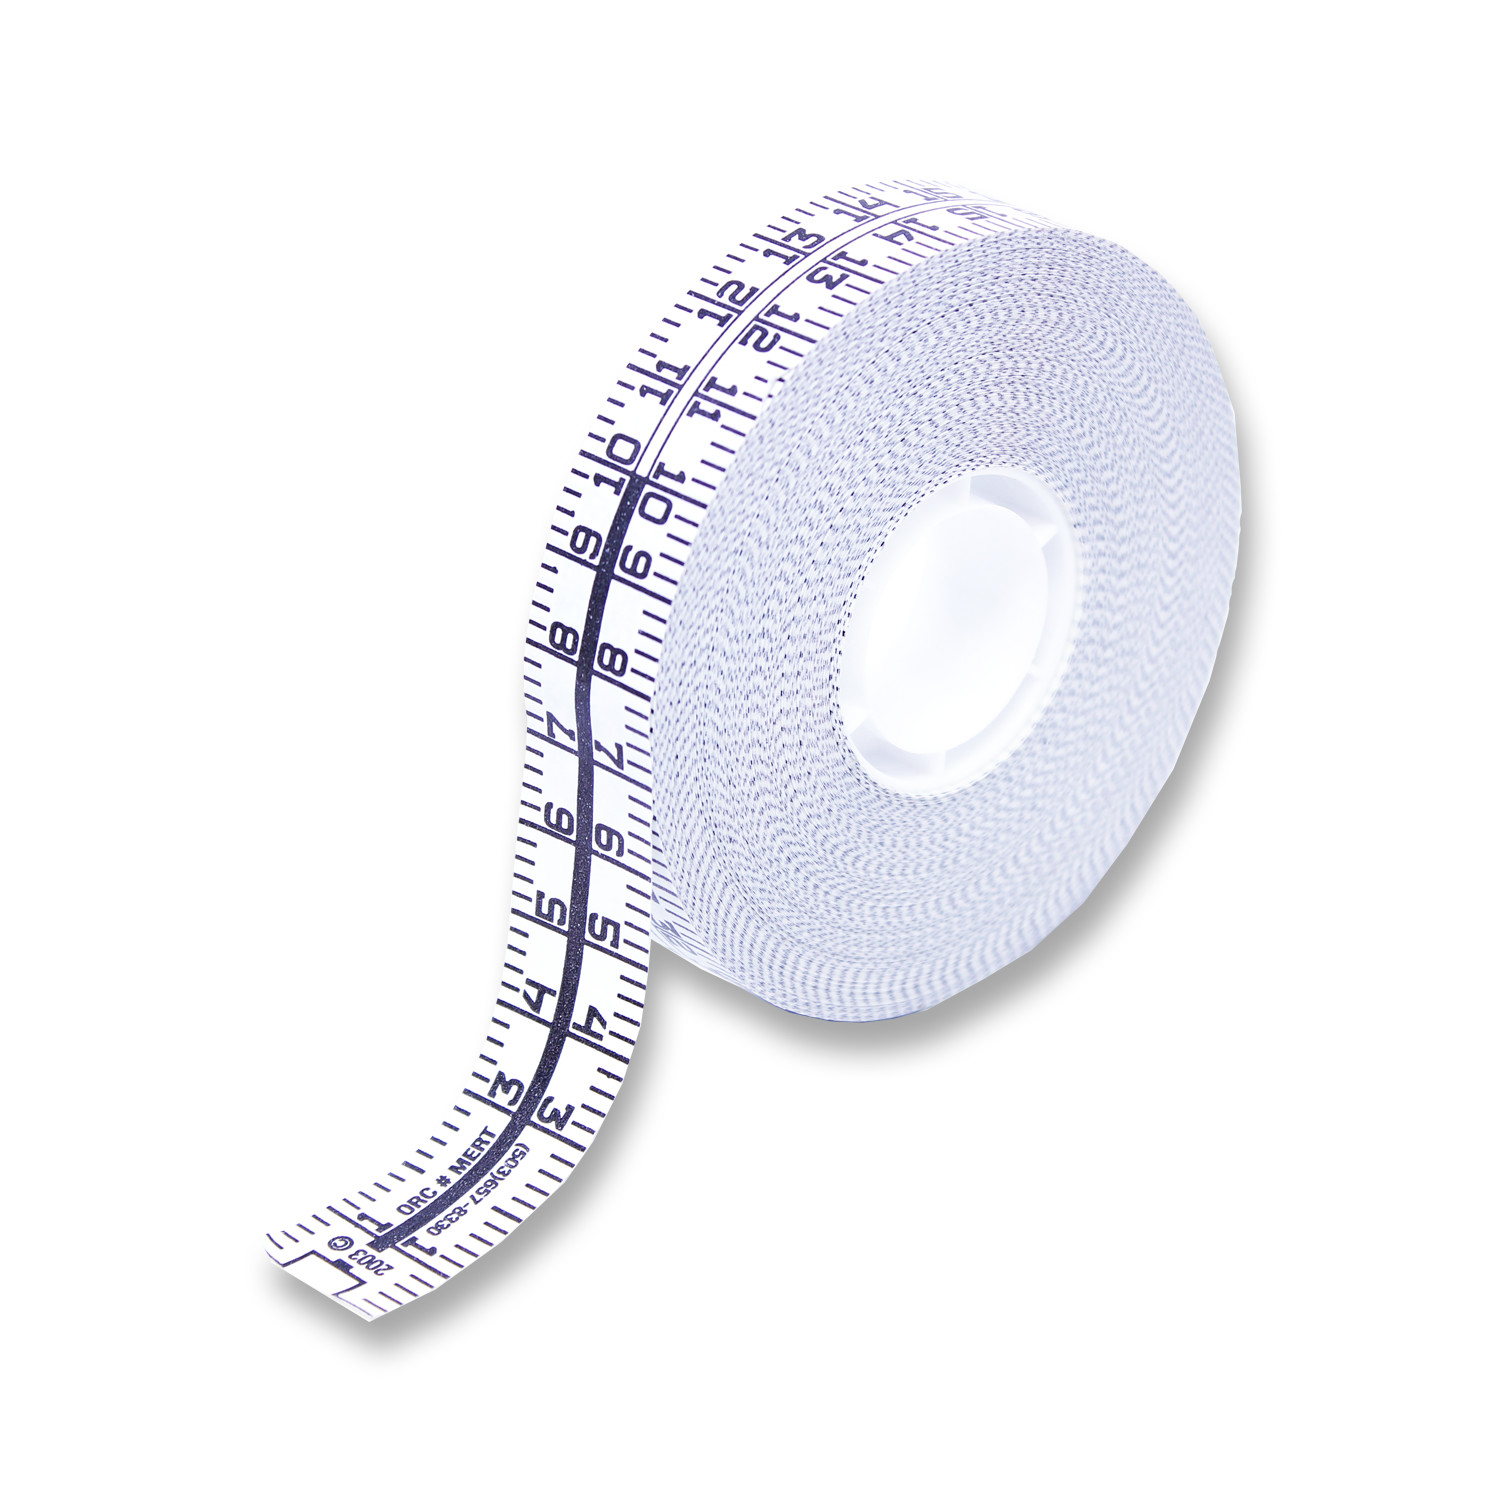 1″ Wide X 12″ Long Ruler Repeats 42 Times in a Roll – Oregon Rule Co.